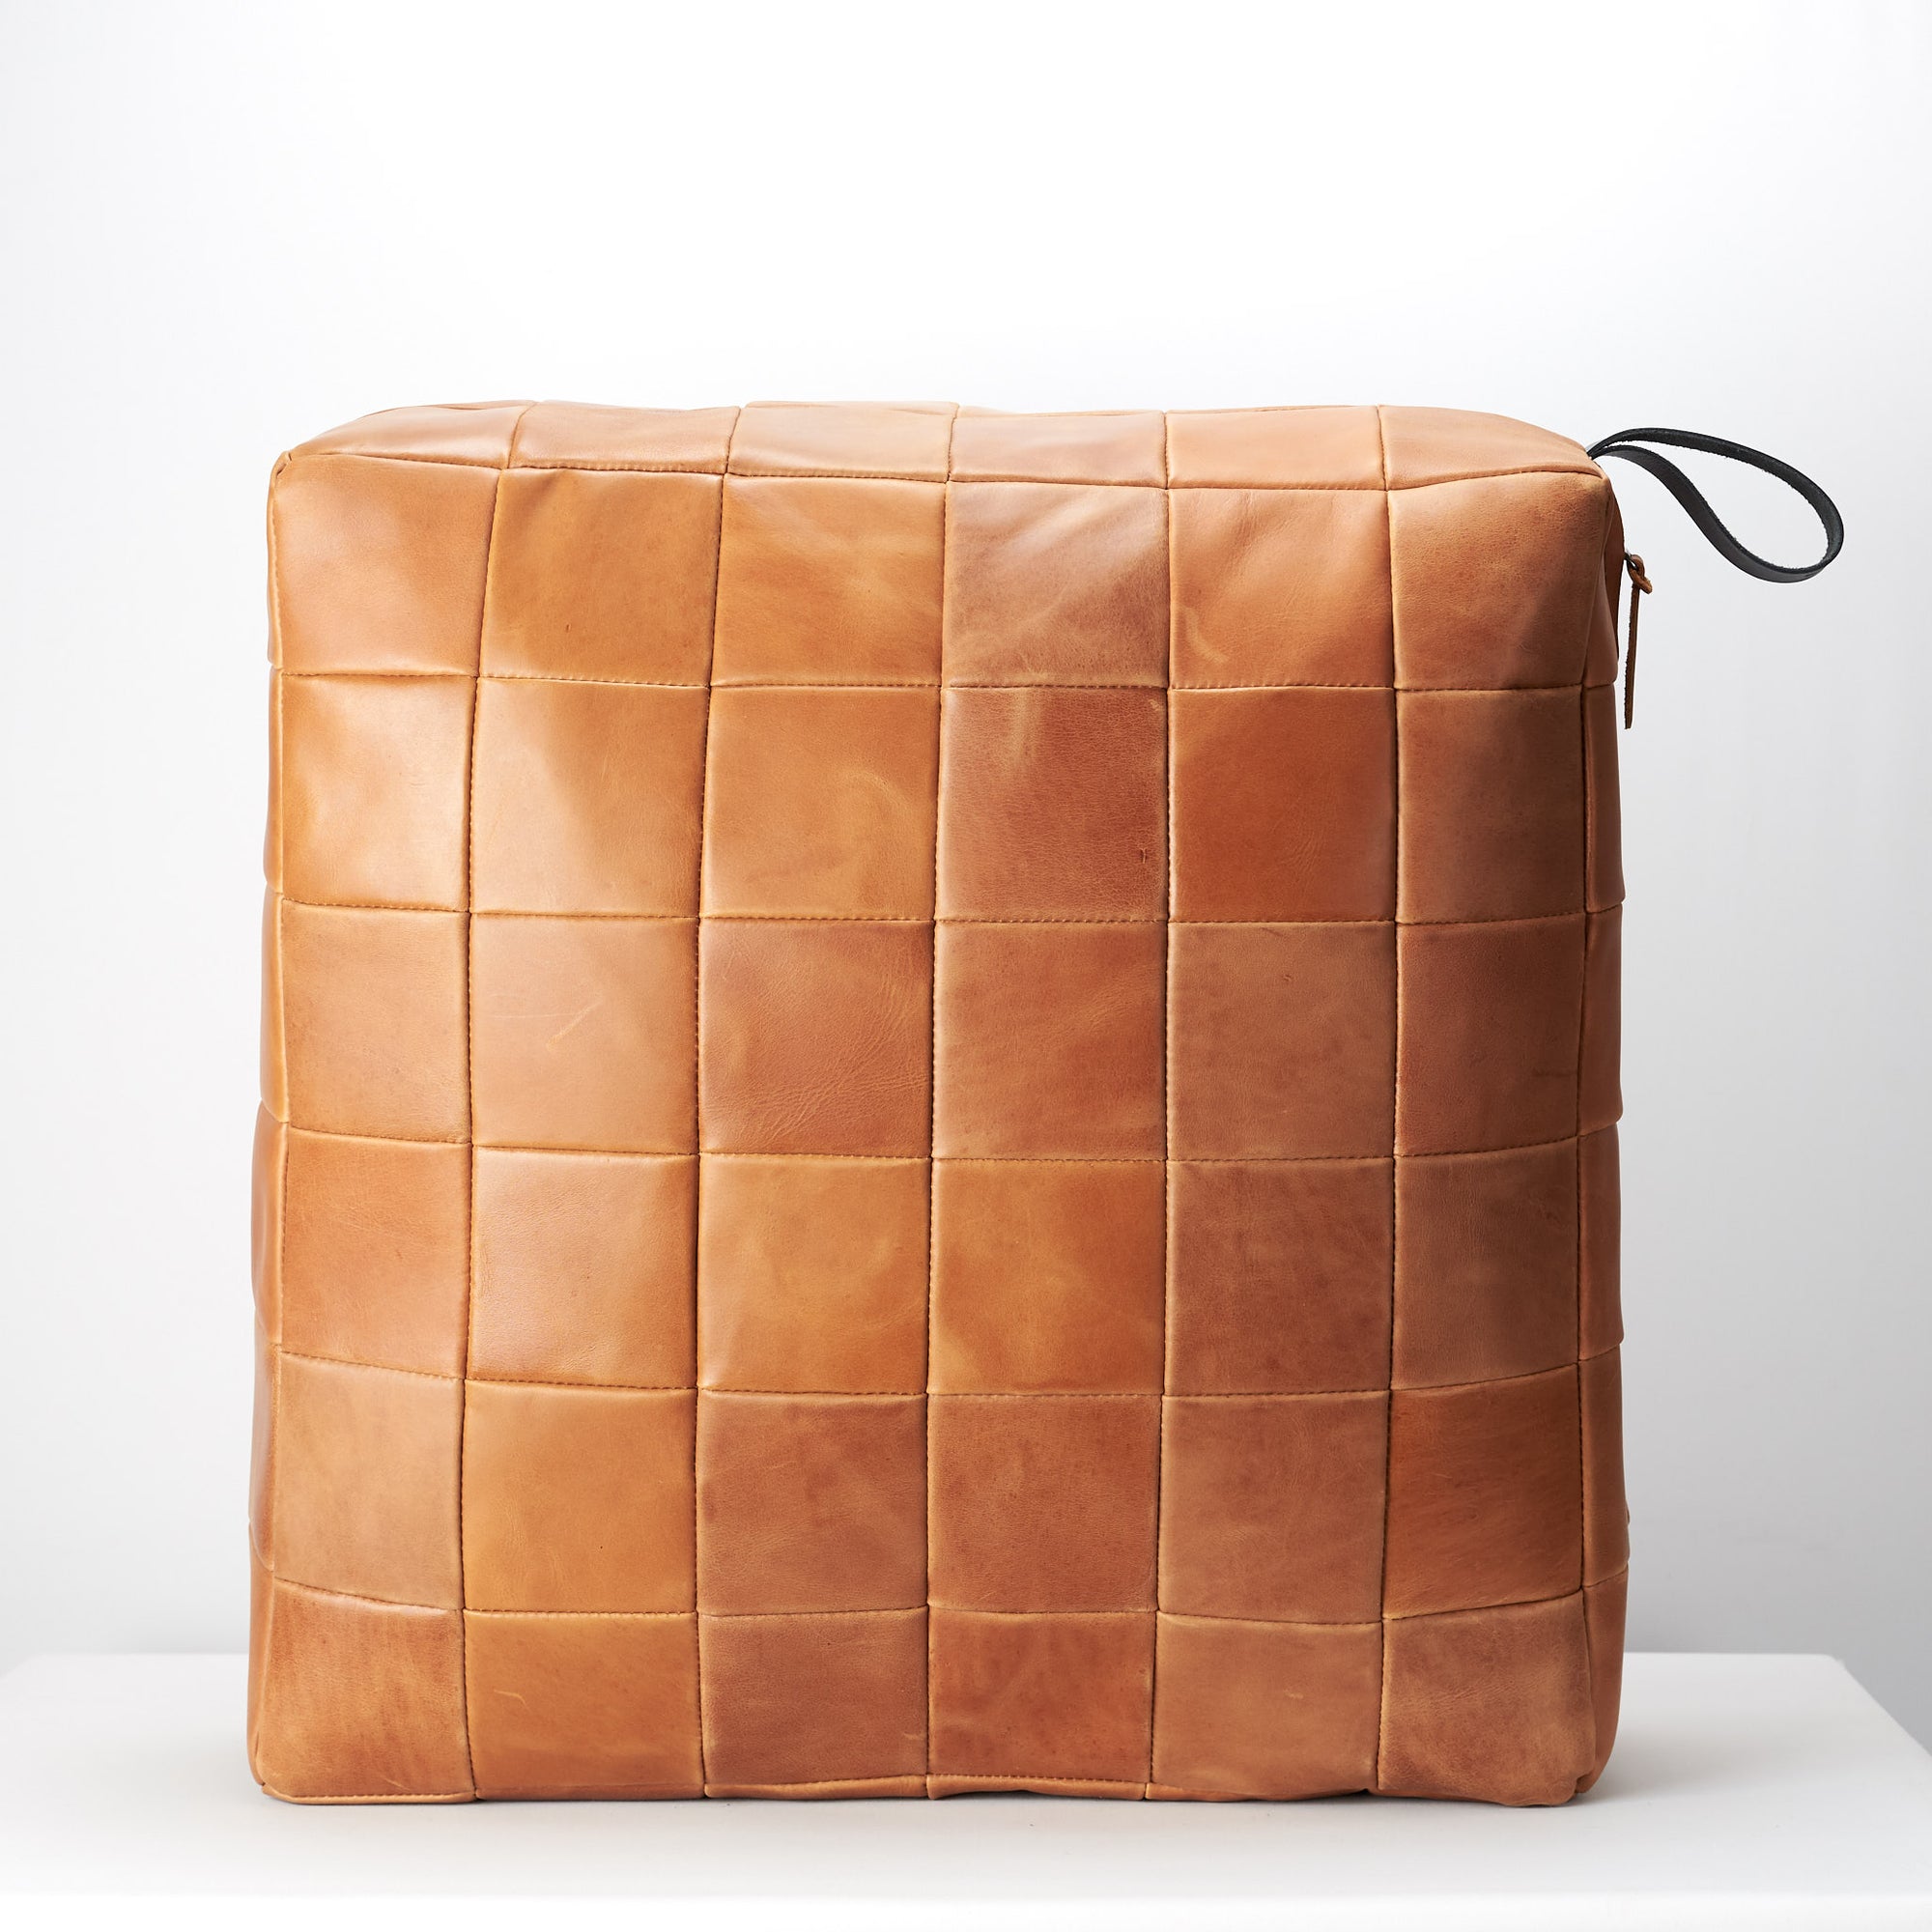 Tan Leather floor cushion pillow for indoors decoration.